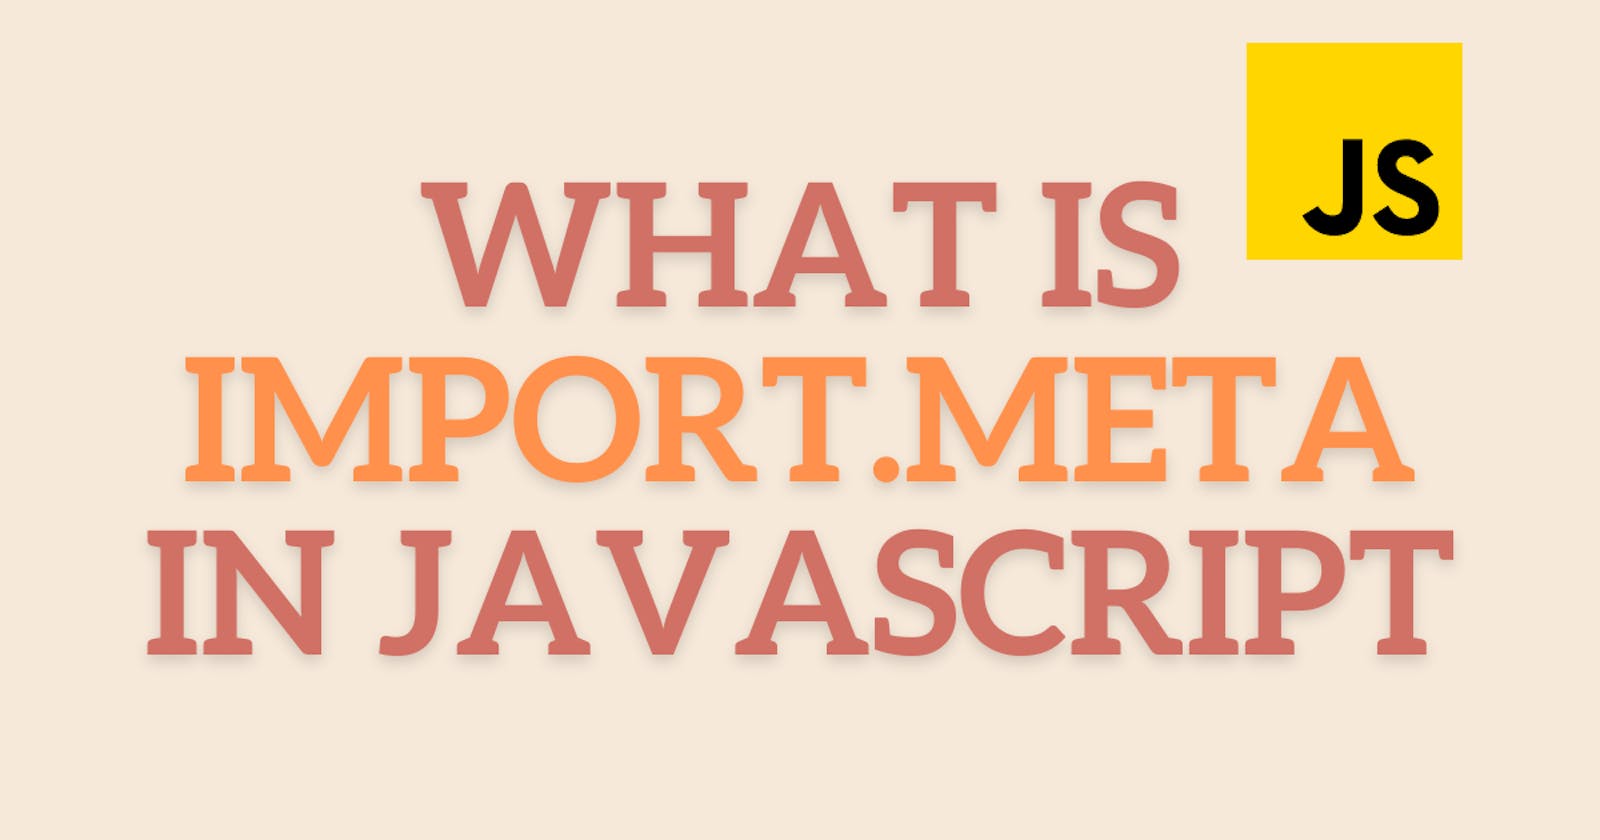 A brief about import.meta in JavaScript